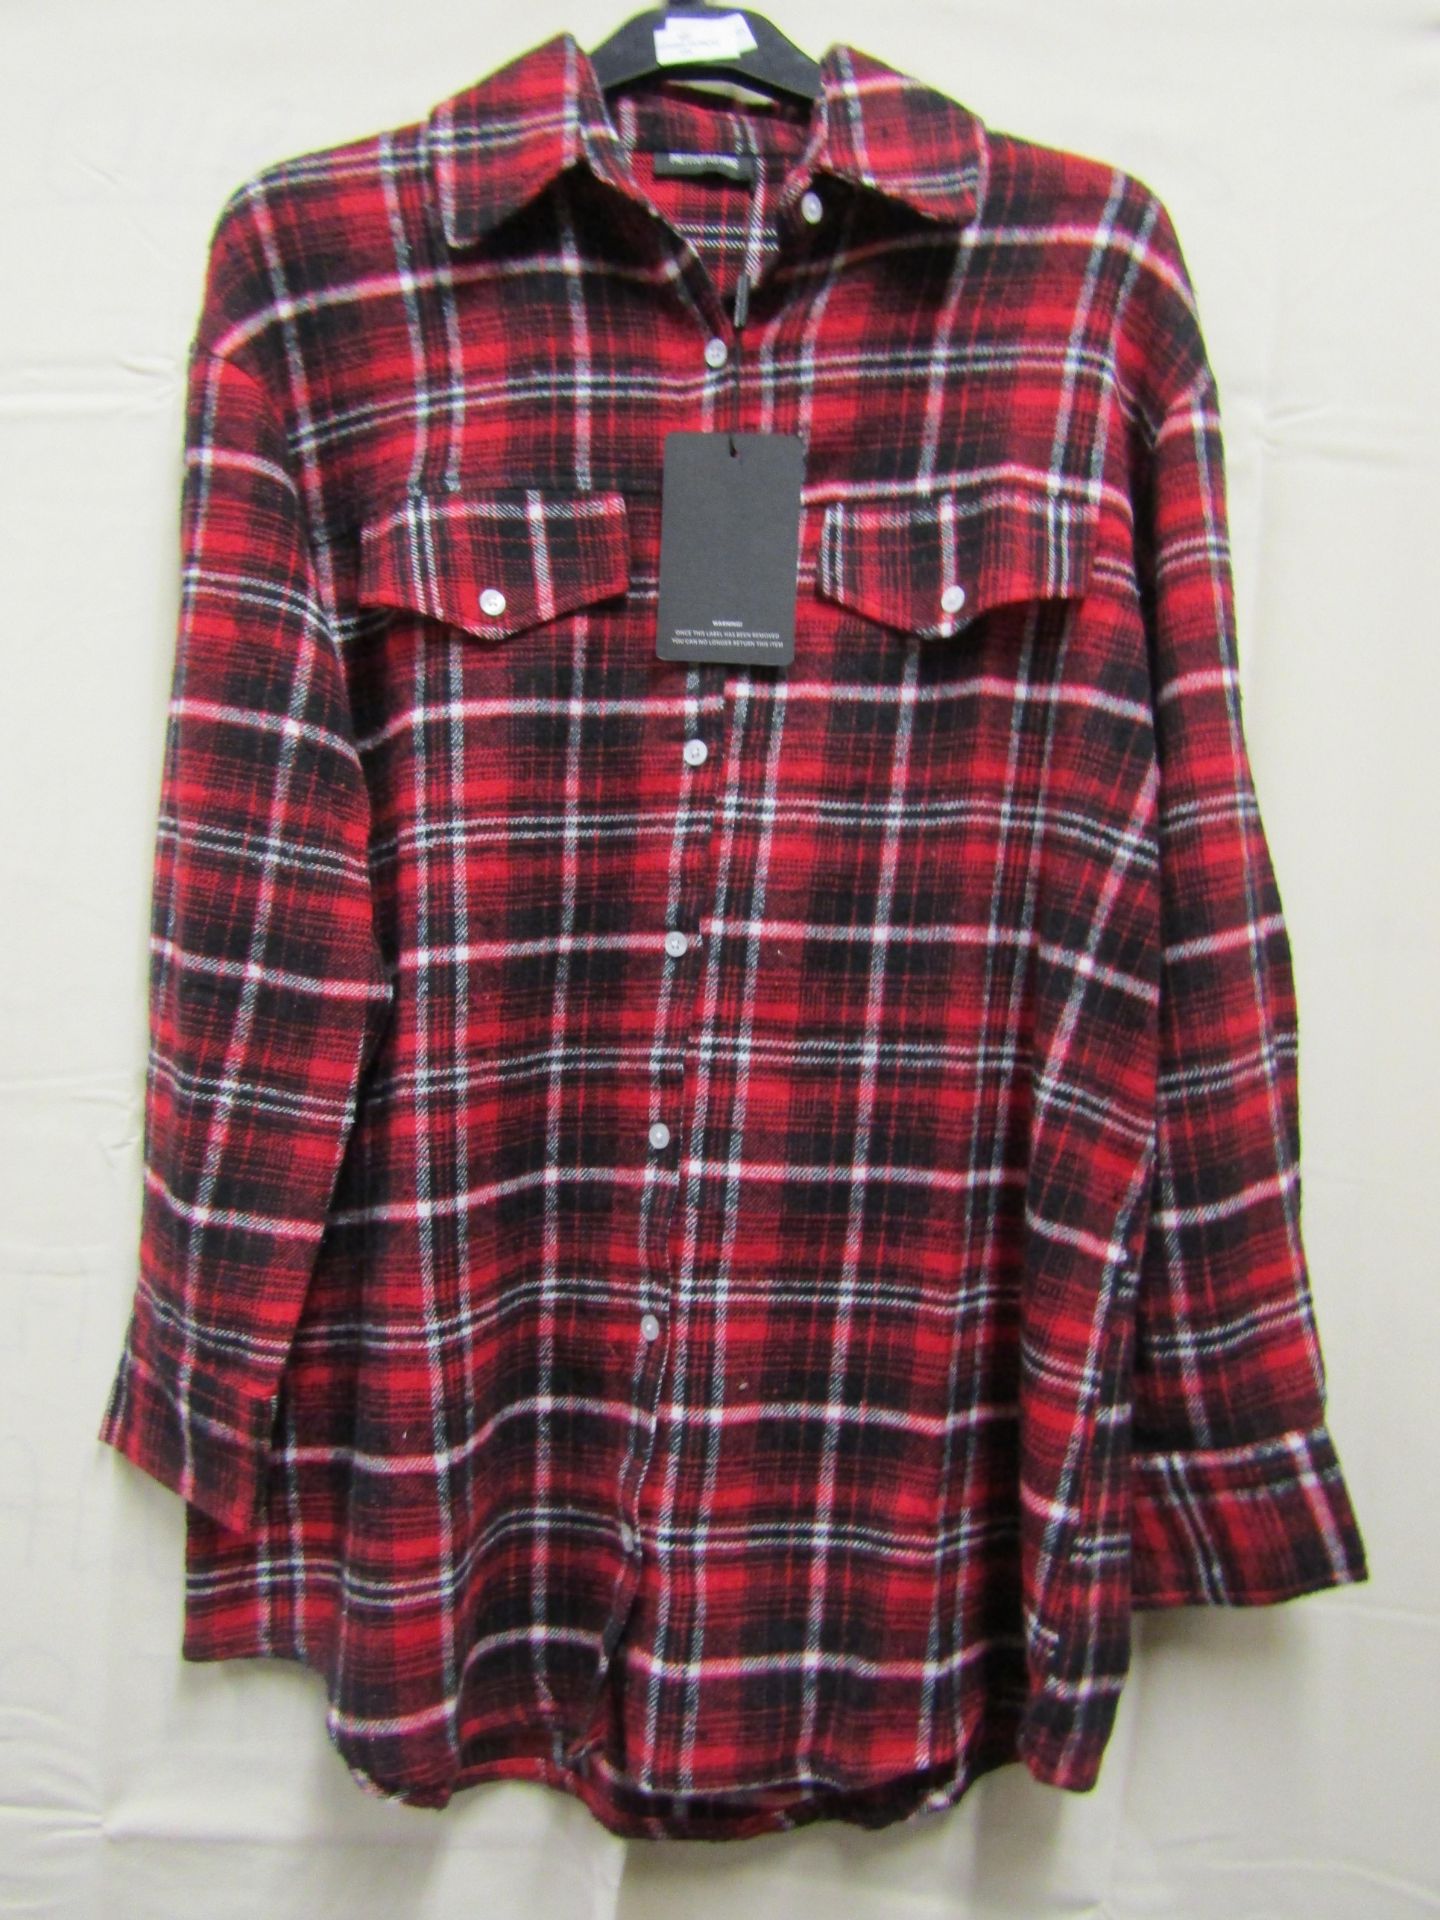 PrettyLittleThing Red Check Shirt One Size New With Tags